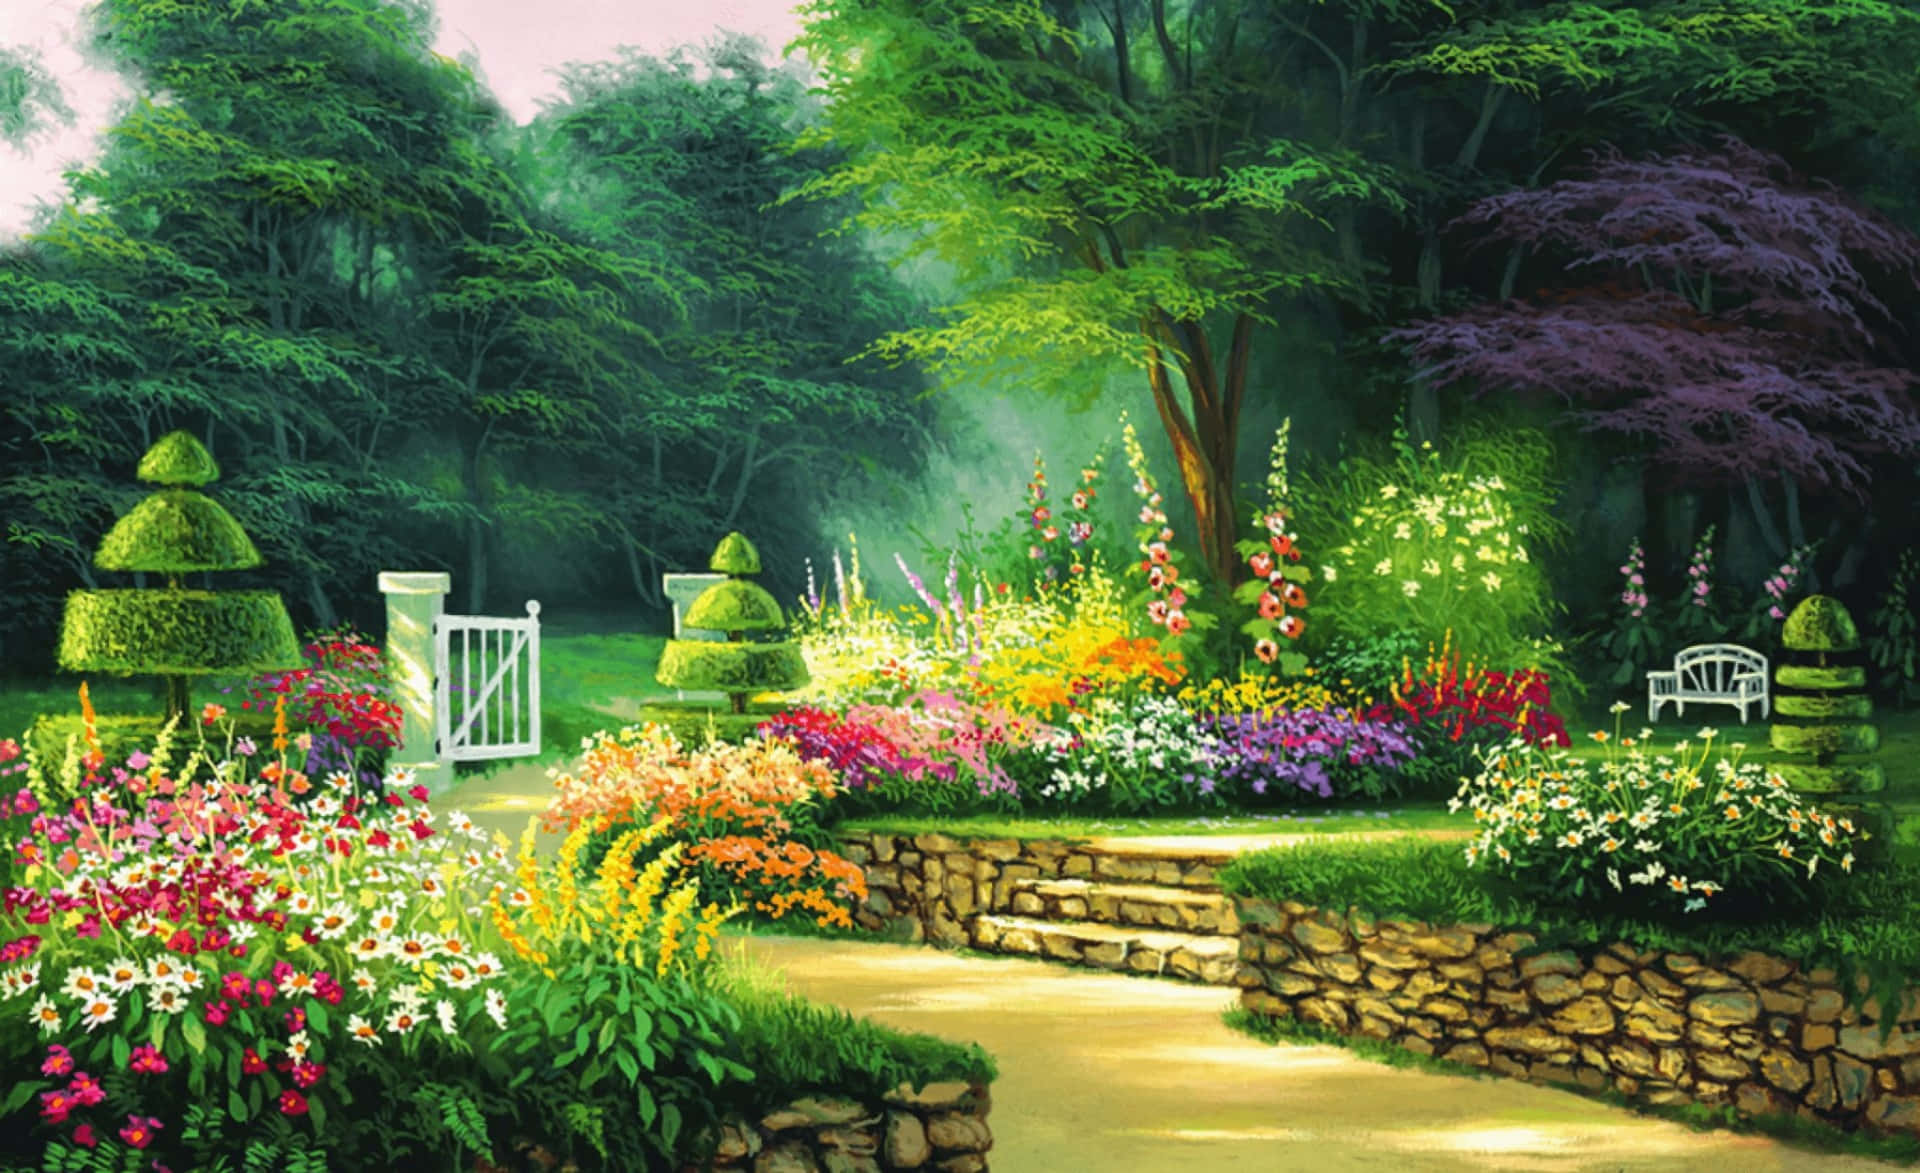 "Discover the Hidden Beauty of Nature in a Garden"